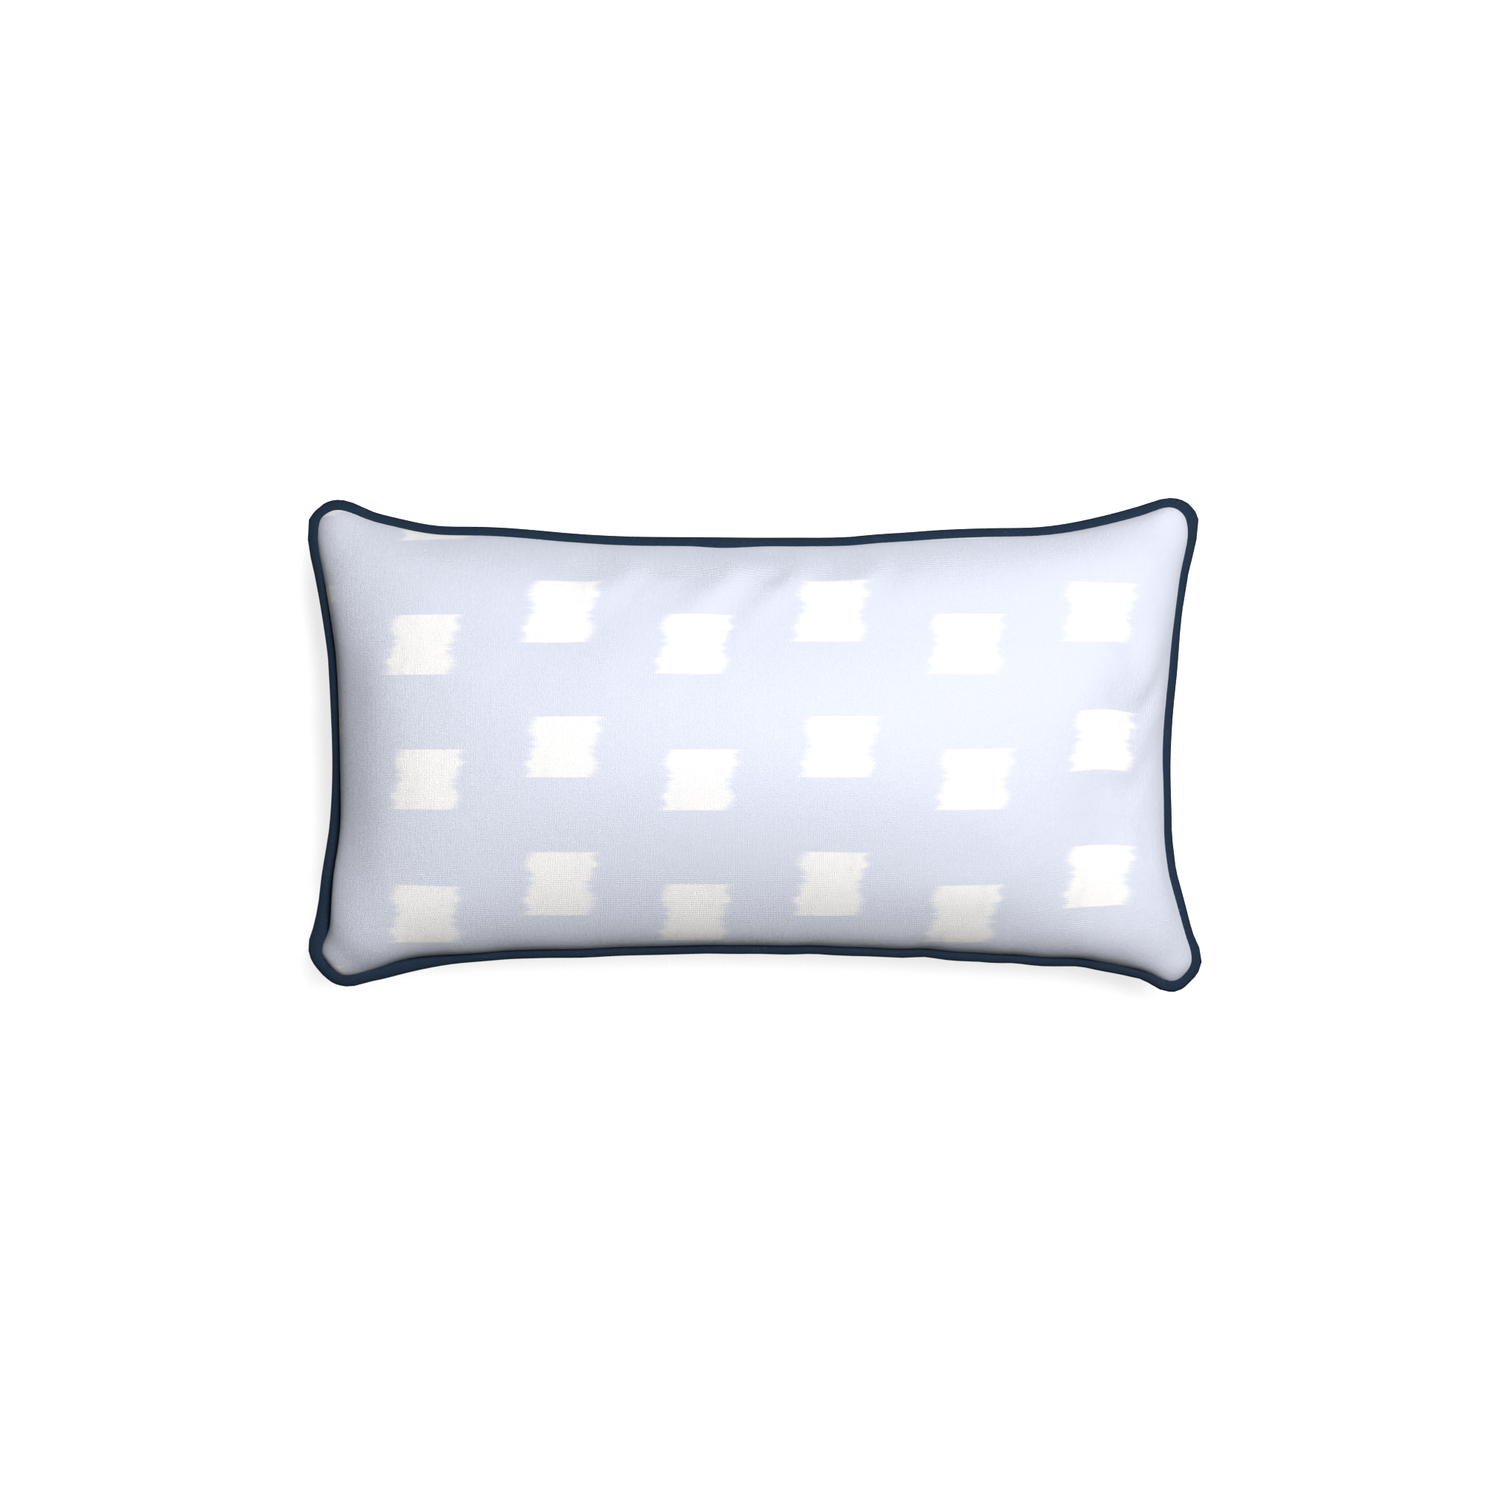 Petite-lumbar denton custom sky blue patternpillow with c piping on white background